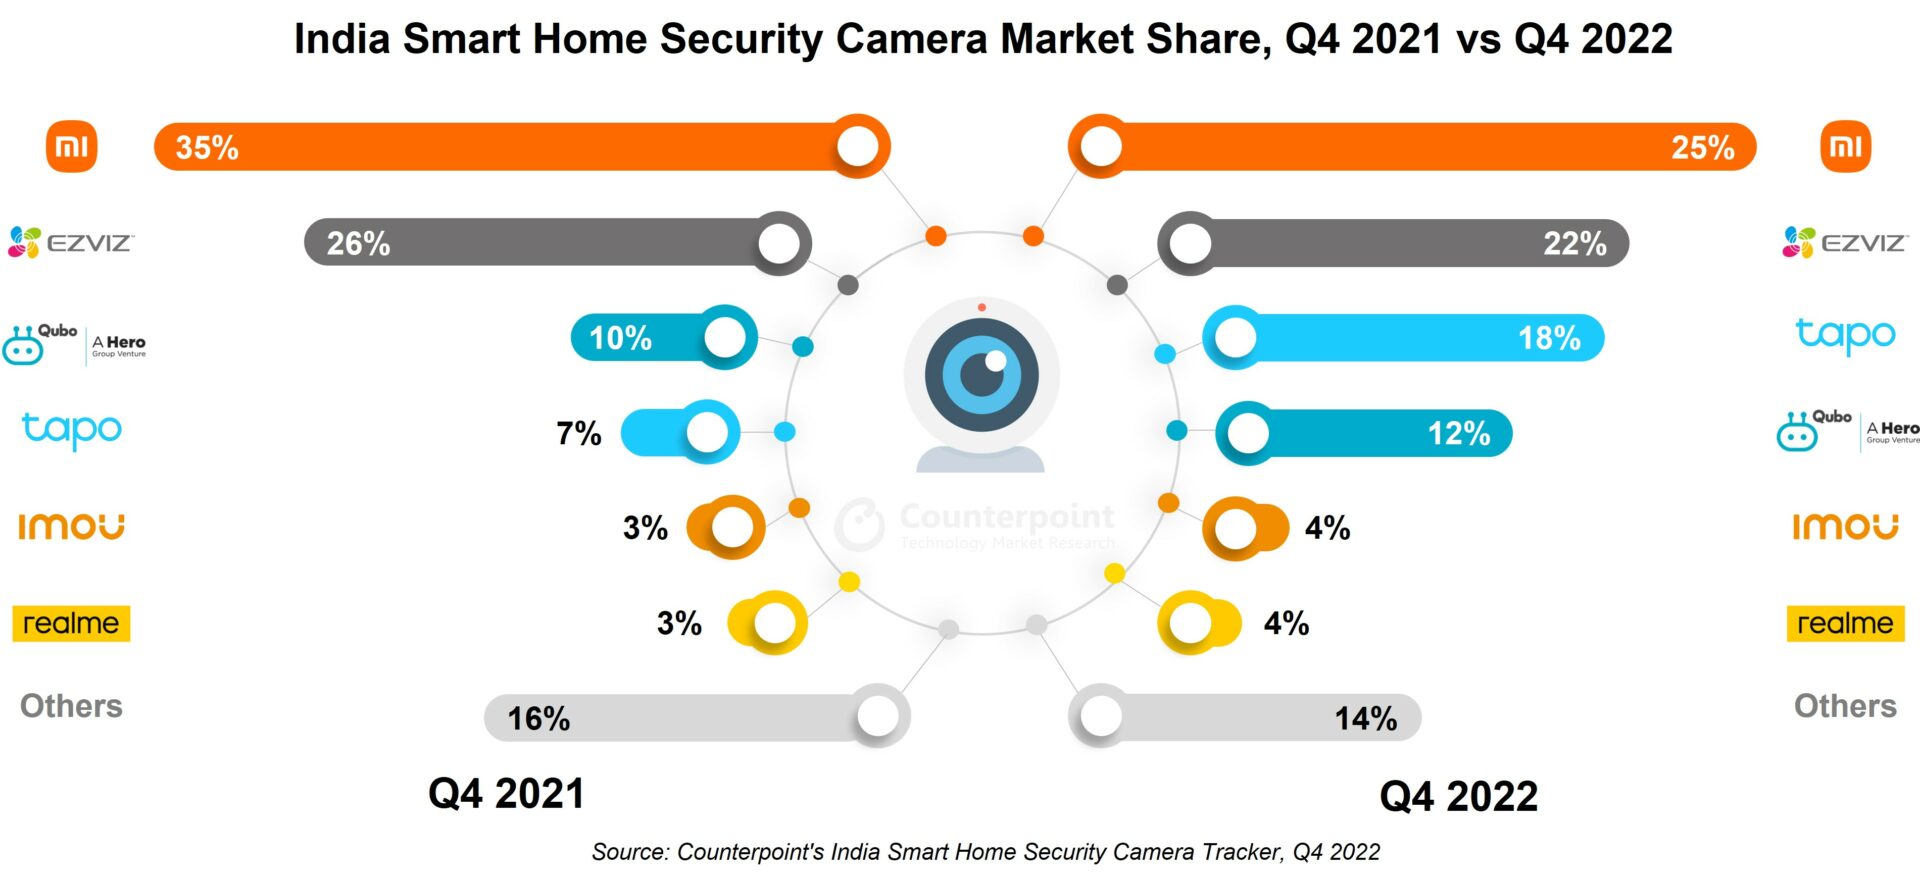 India Smart Home Security Camera Market Share, Q4 2021 vs Q4 2022, Counterpoint Research